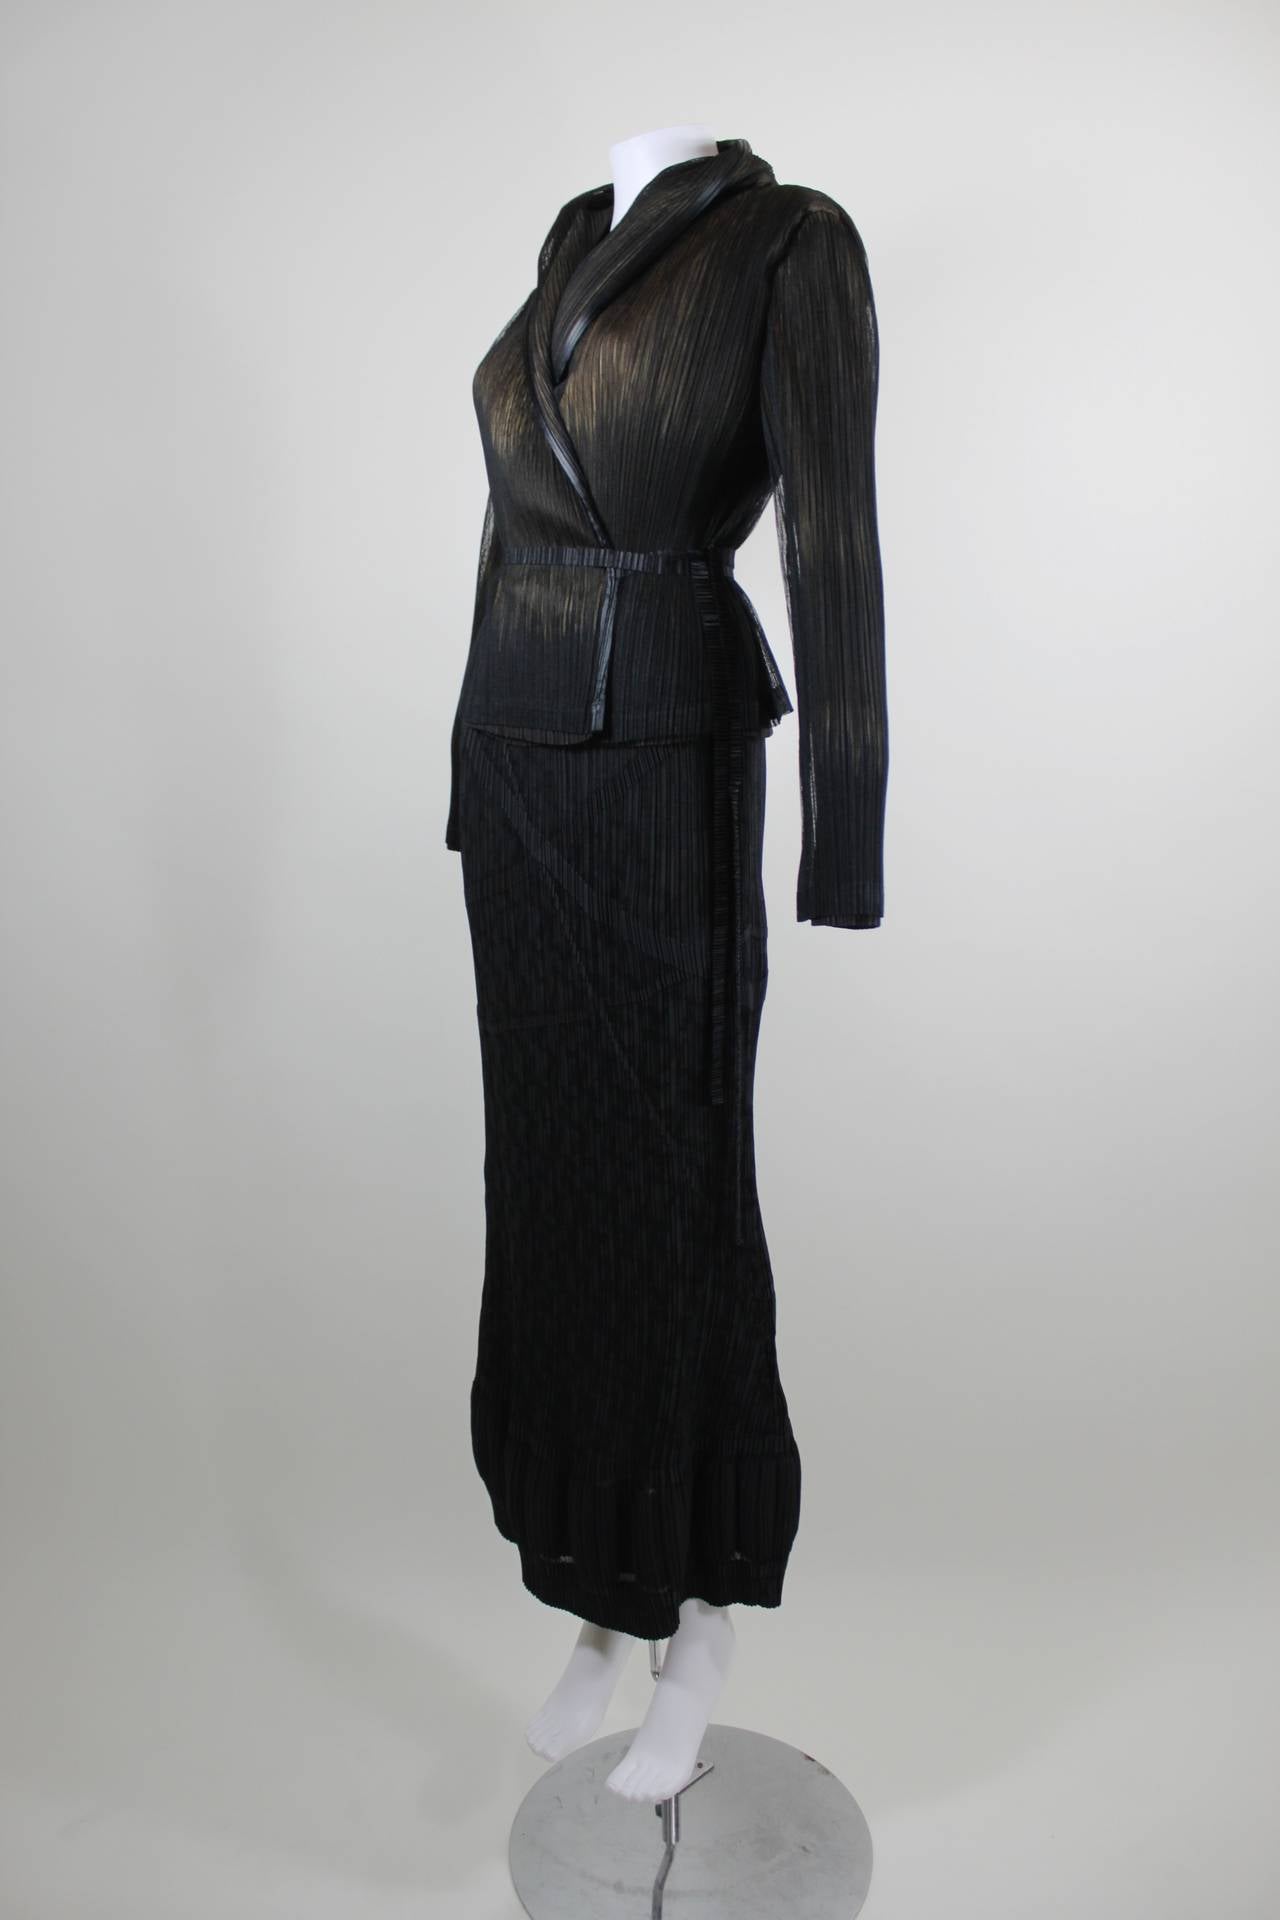 A fabulous ensemble from Issey Miyake. The jacket features a removeable shawl collar; the sheer black pleated fabric rests on a nude base, adding depth and texture. Jacket wraps with a thin pleated belt. The column skirt features a banding pattern